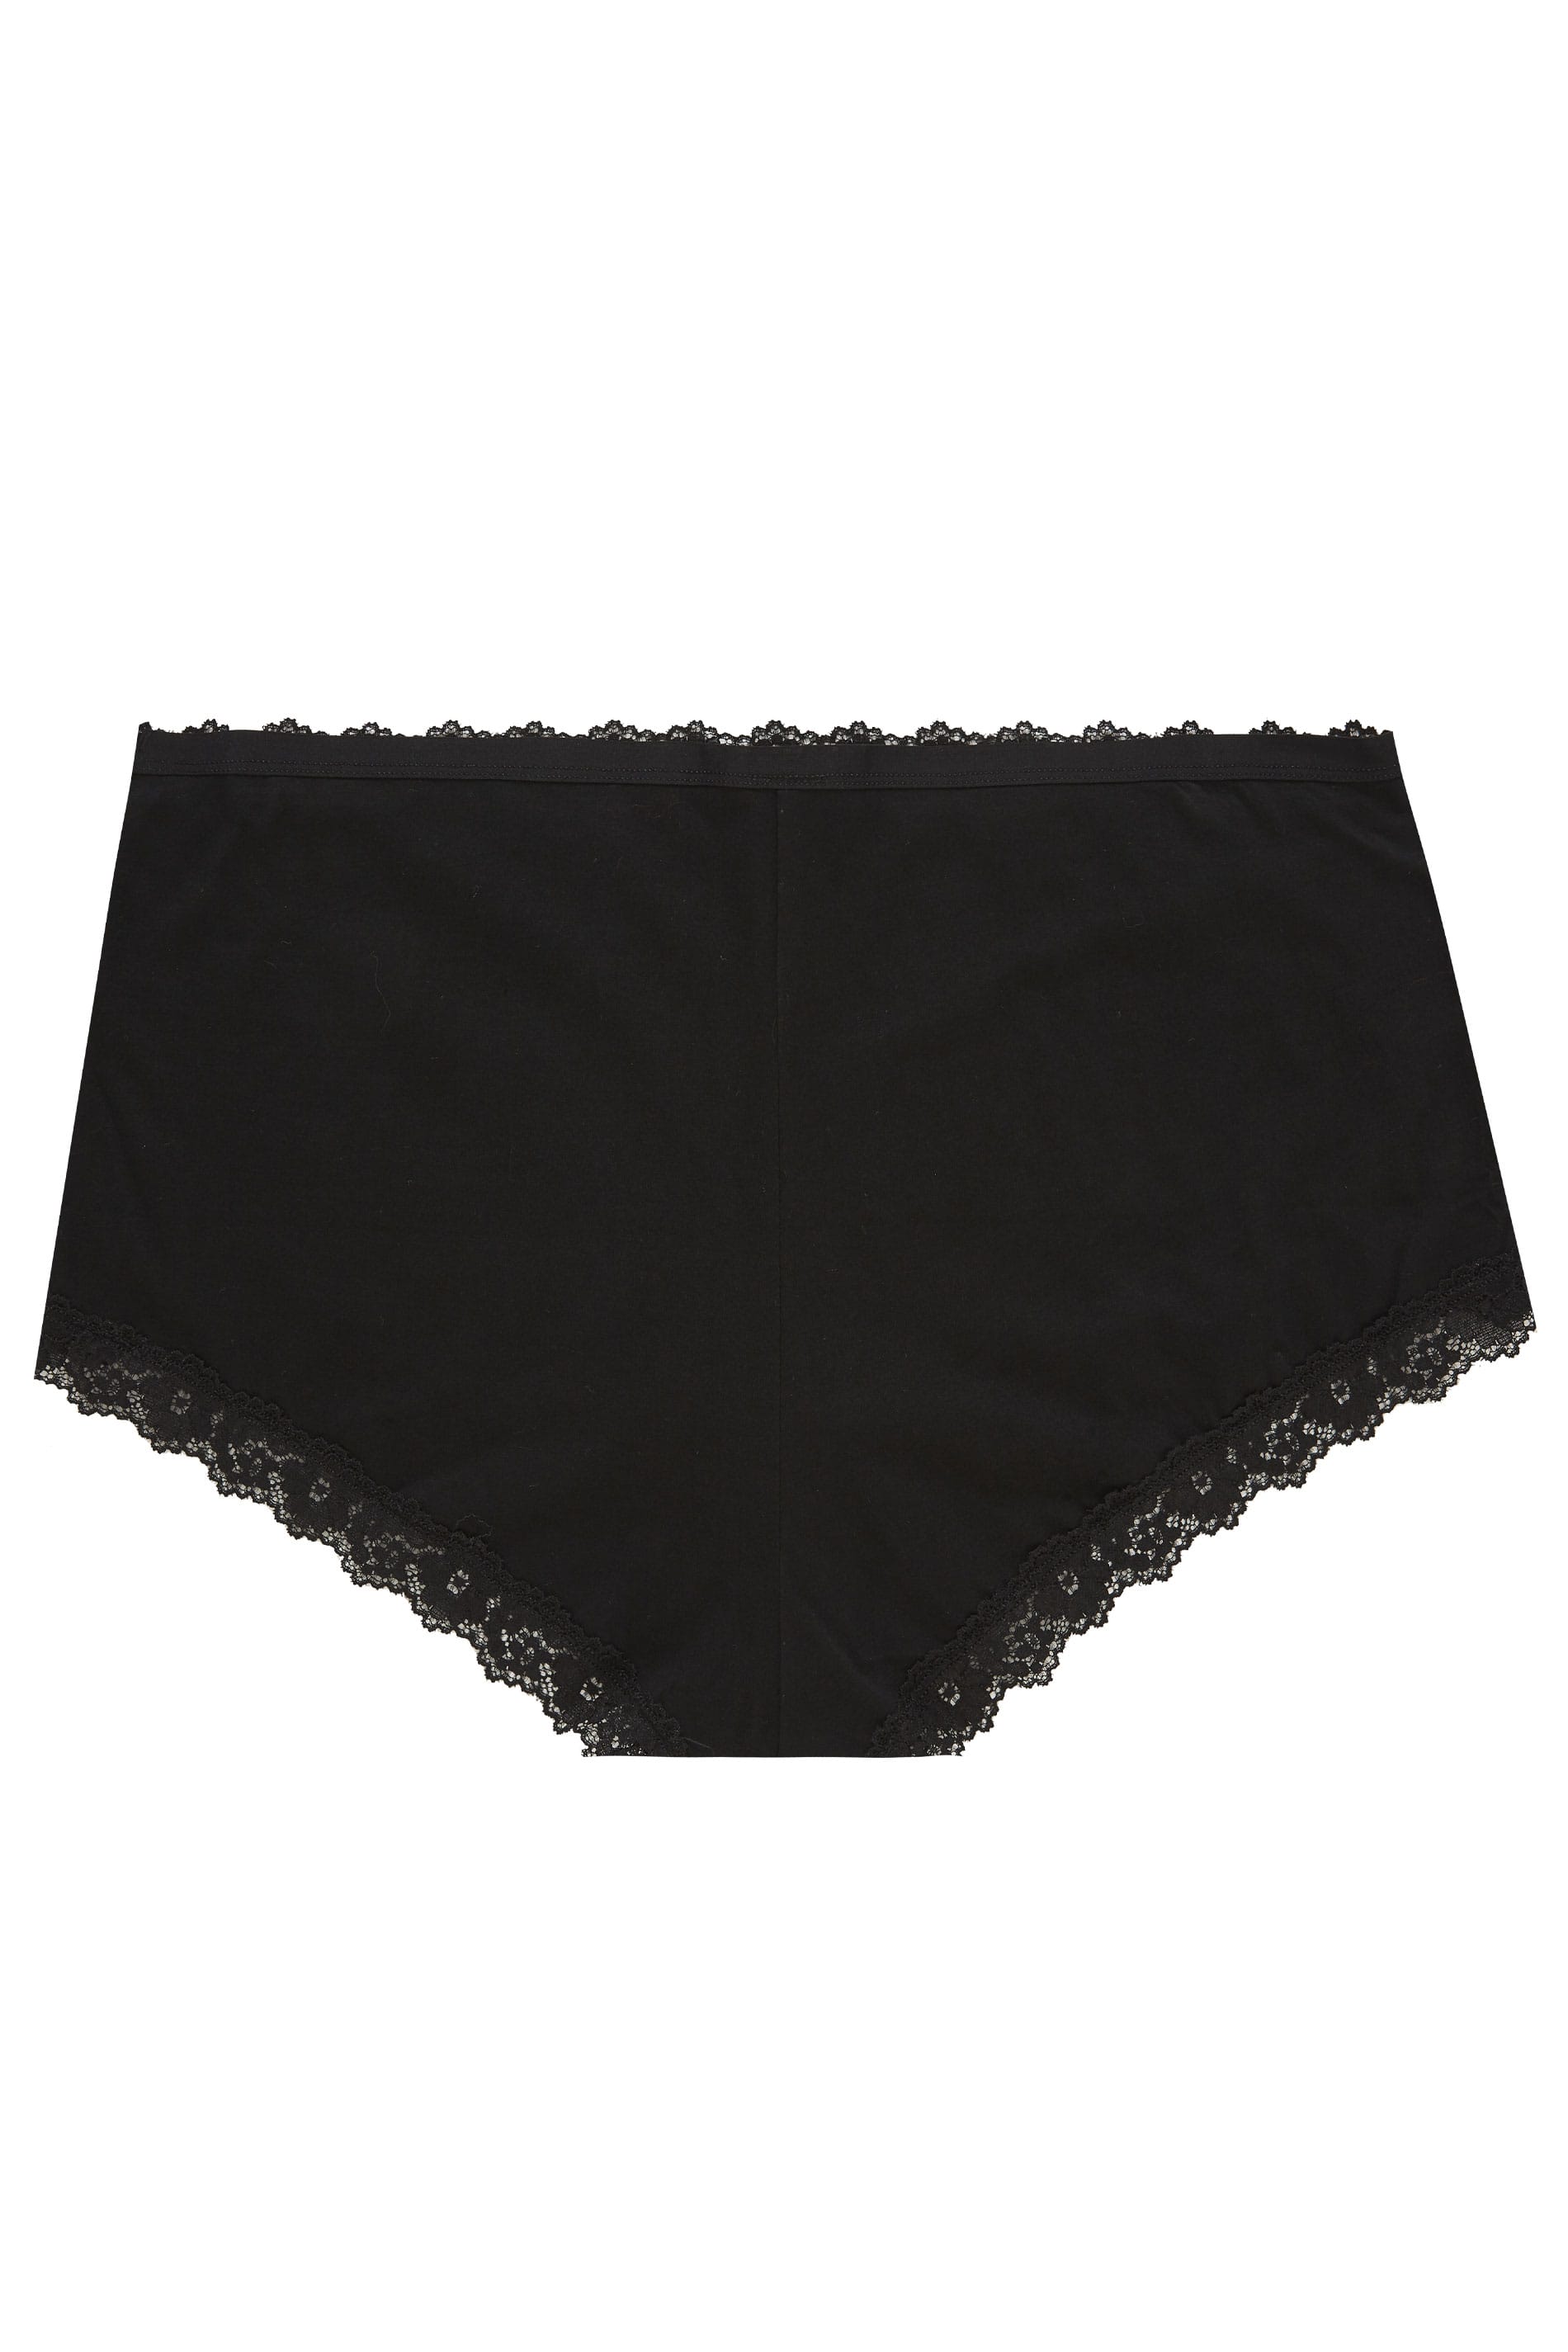 4 PACK Black Lace Trim High Waisted Shorts